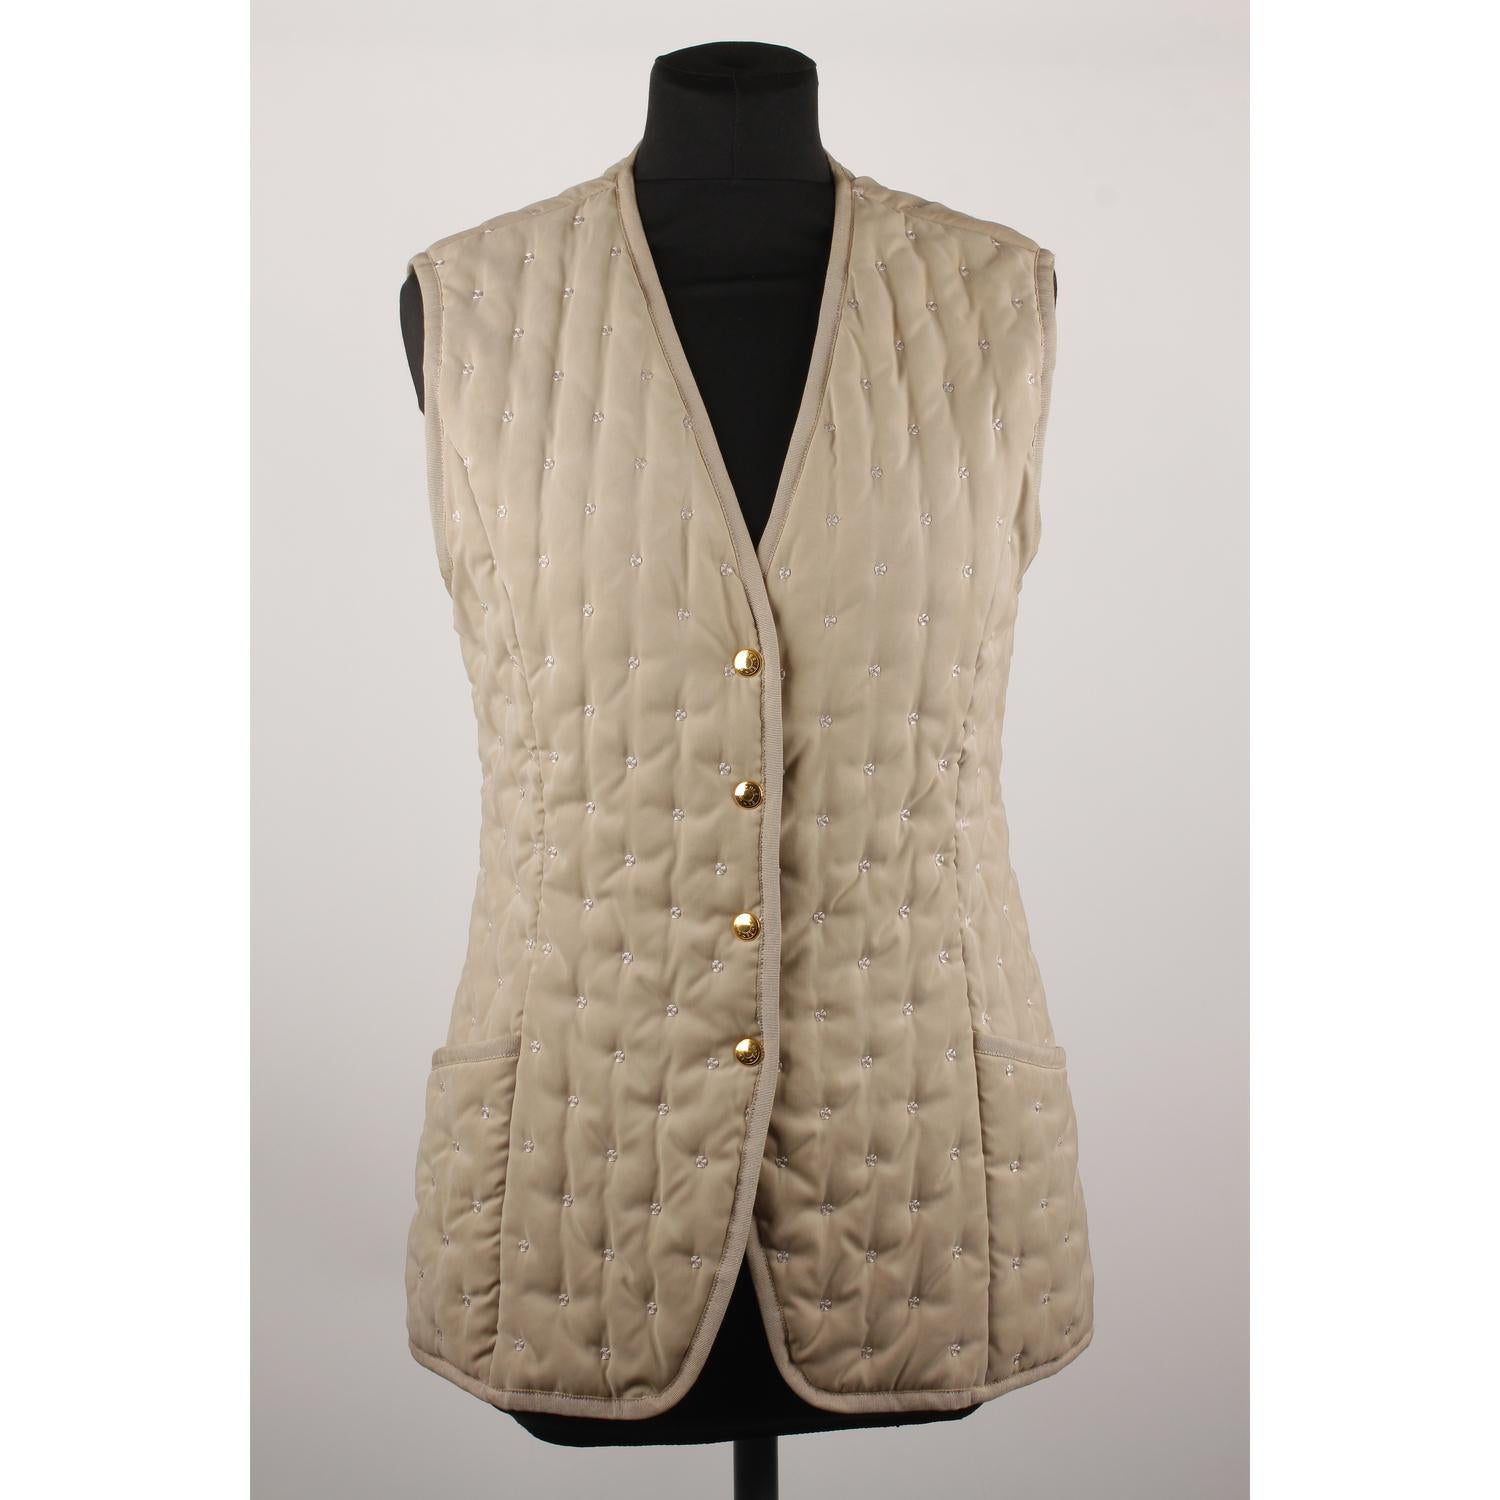 Hermes Paris Vintage Beige Embroidered Padded Vest Size 38

Model: Vest
Material: Cotton
Color: Beige 
Gender: Women
Country of Manufacture: France
Size: Small
TOTAL LENGTH: 26 inches - 66,1 cm  (from shoulder to hem)
SLEEVE LENGTH: - 
BUST: 17